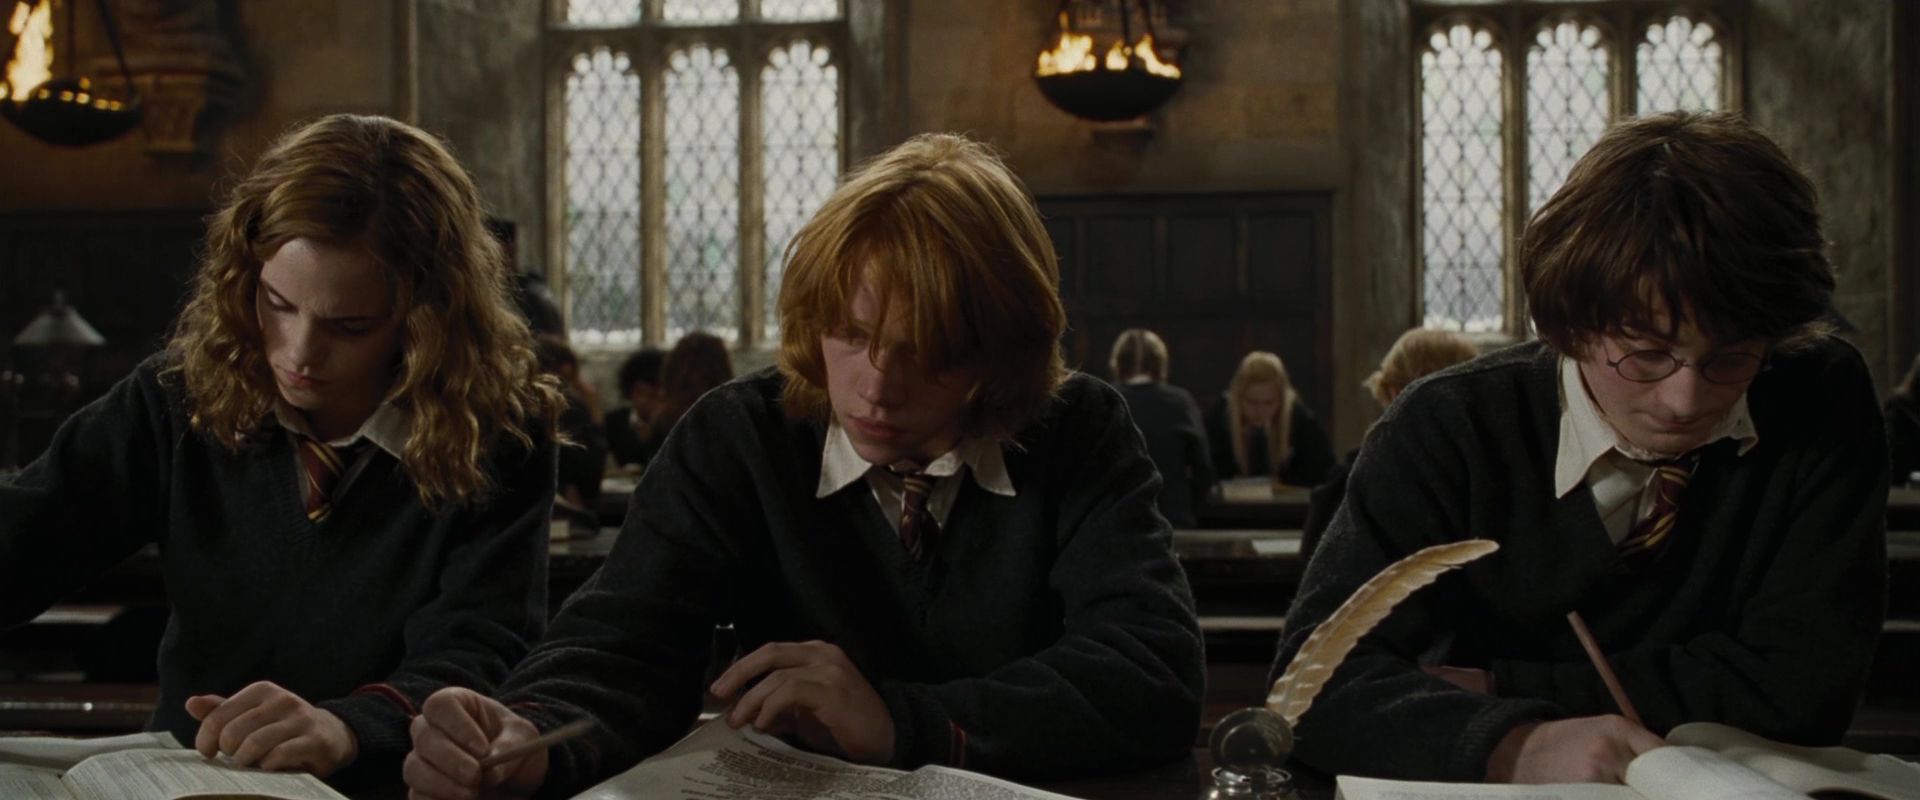 Ronald Weasley Image: Harry Potter And The Goblet Of apoy.